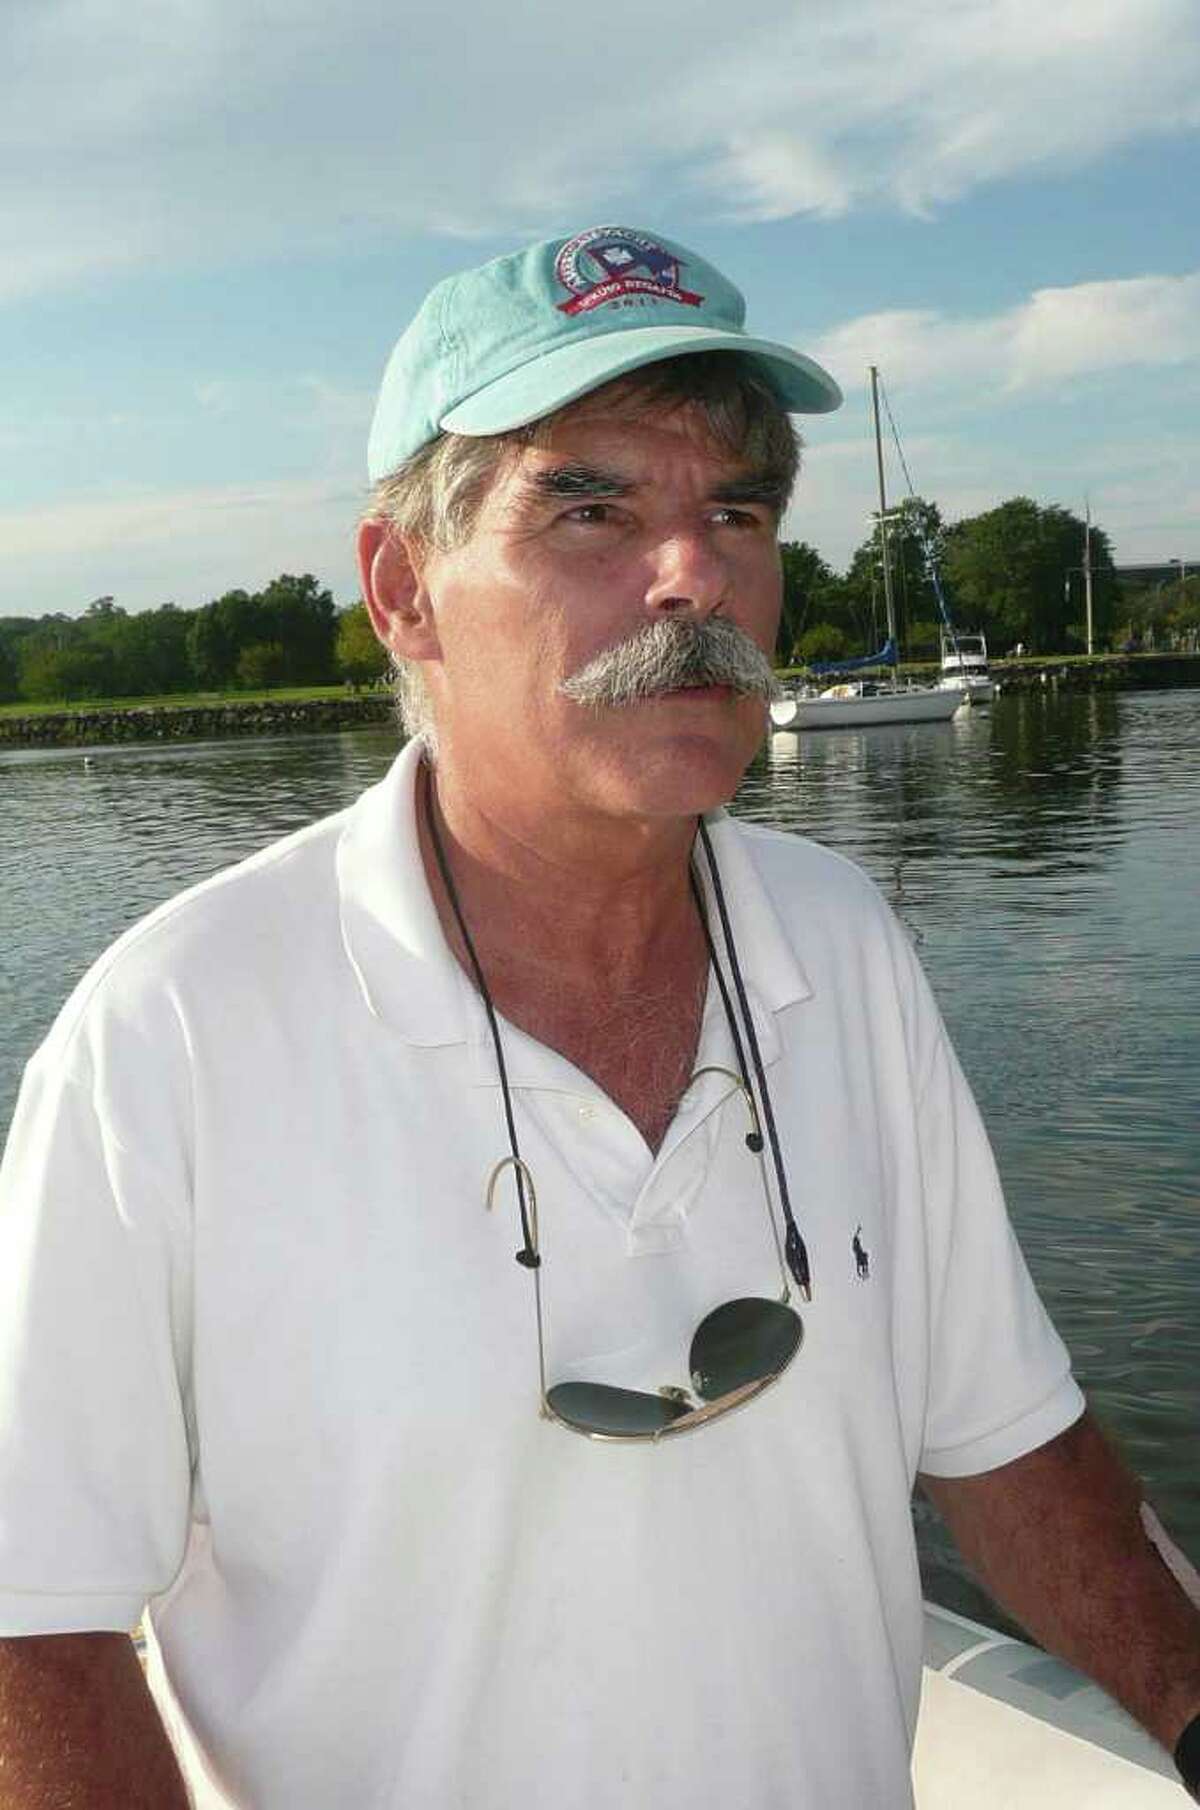 Gov. Dannel P. Malloy has chosen Greenwich resident and lifelong sailor Ian MacMillan (shown here) to be the town's new harbor master.